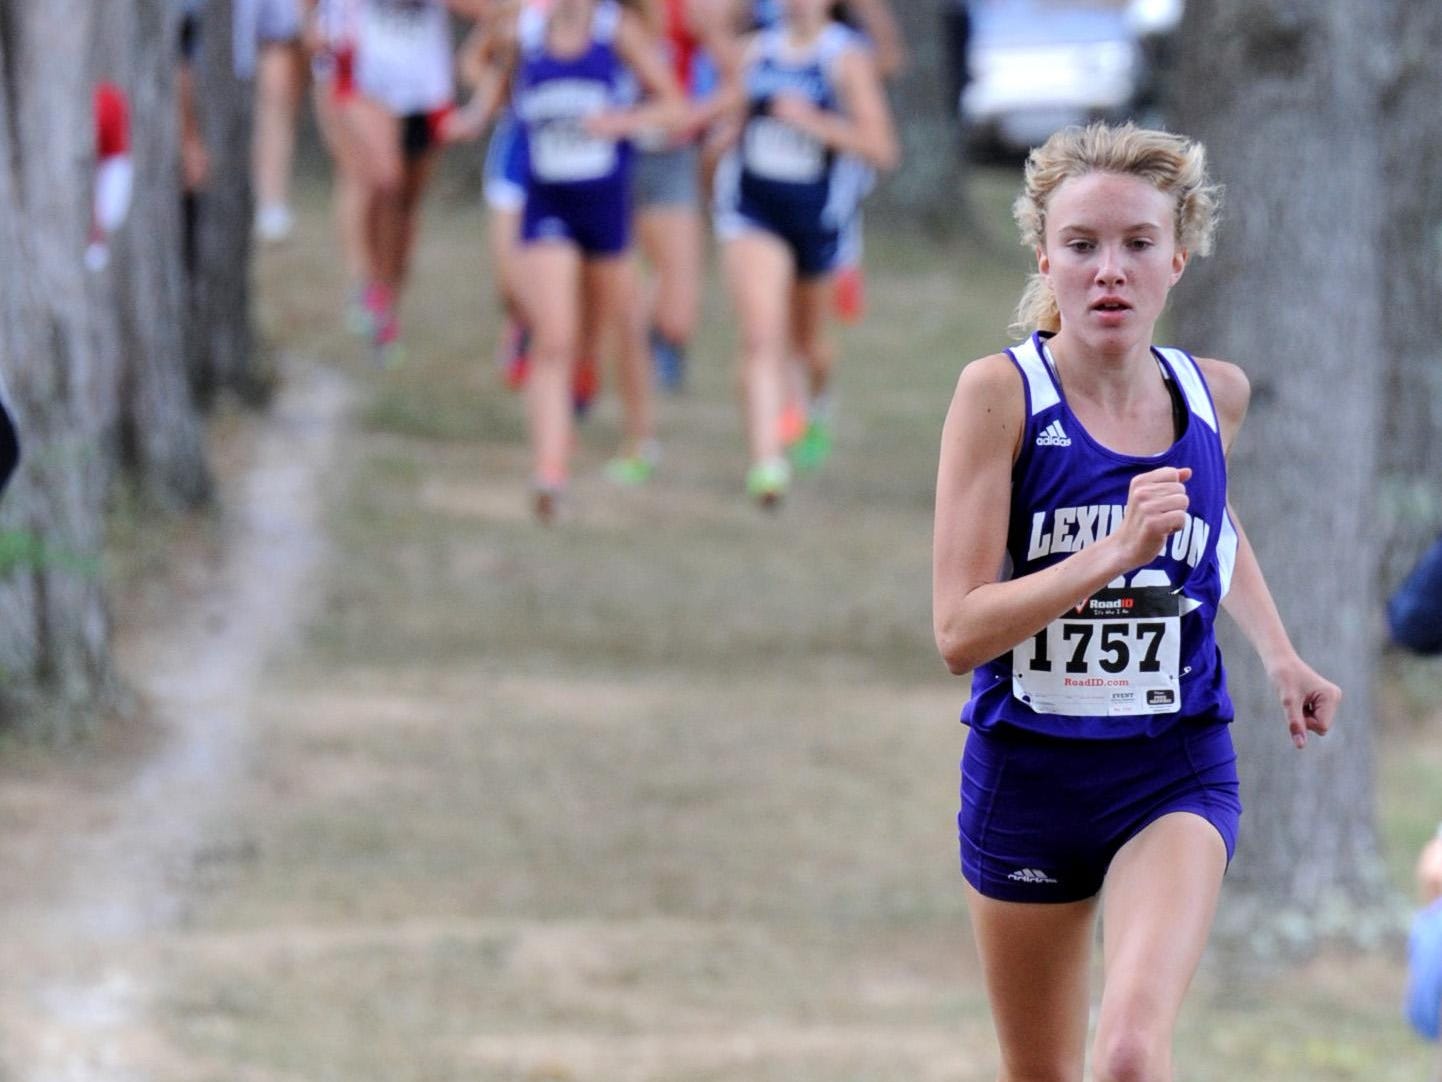 Lexington's Dominique Clairmonte goes after a repeat state title in cross country after missing the entire 2013 season with a stress fracture in her foot.